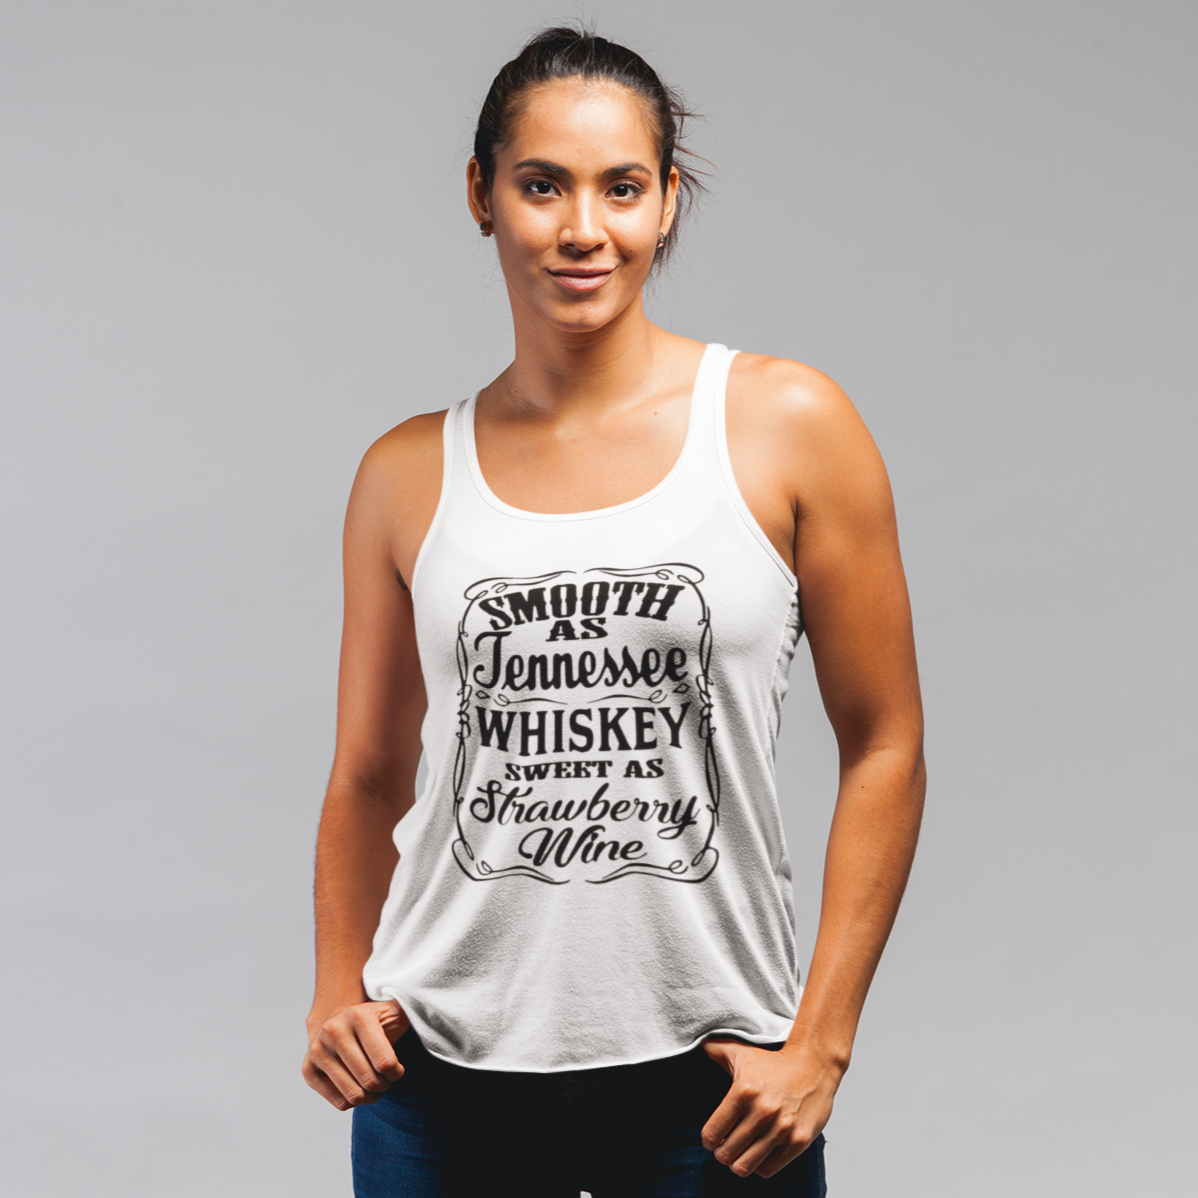 Smooth as Tennessee Whiskey Sweet as Strawberry Wine Tank Top - Thoughtful Blossom